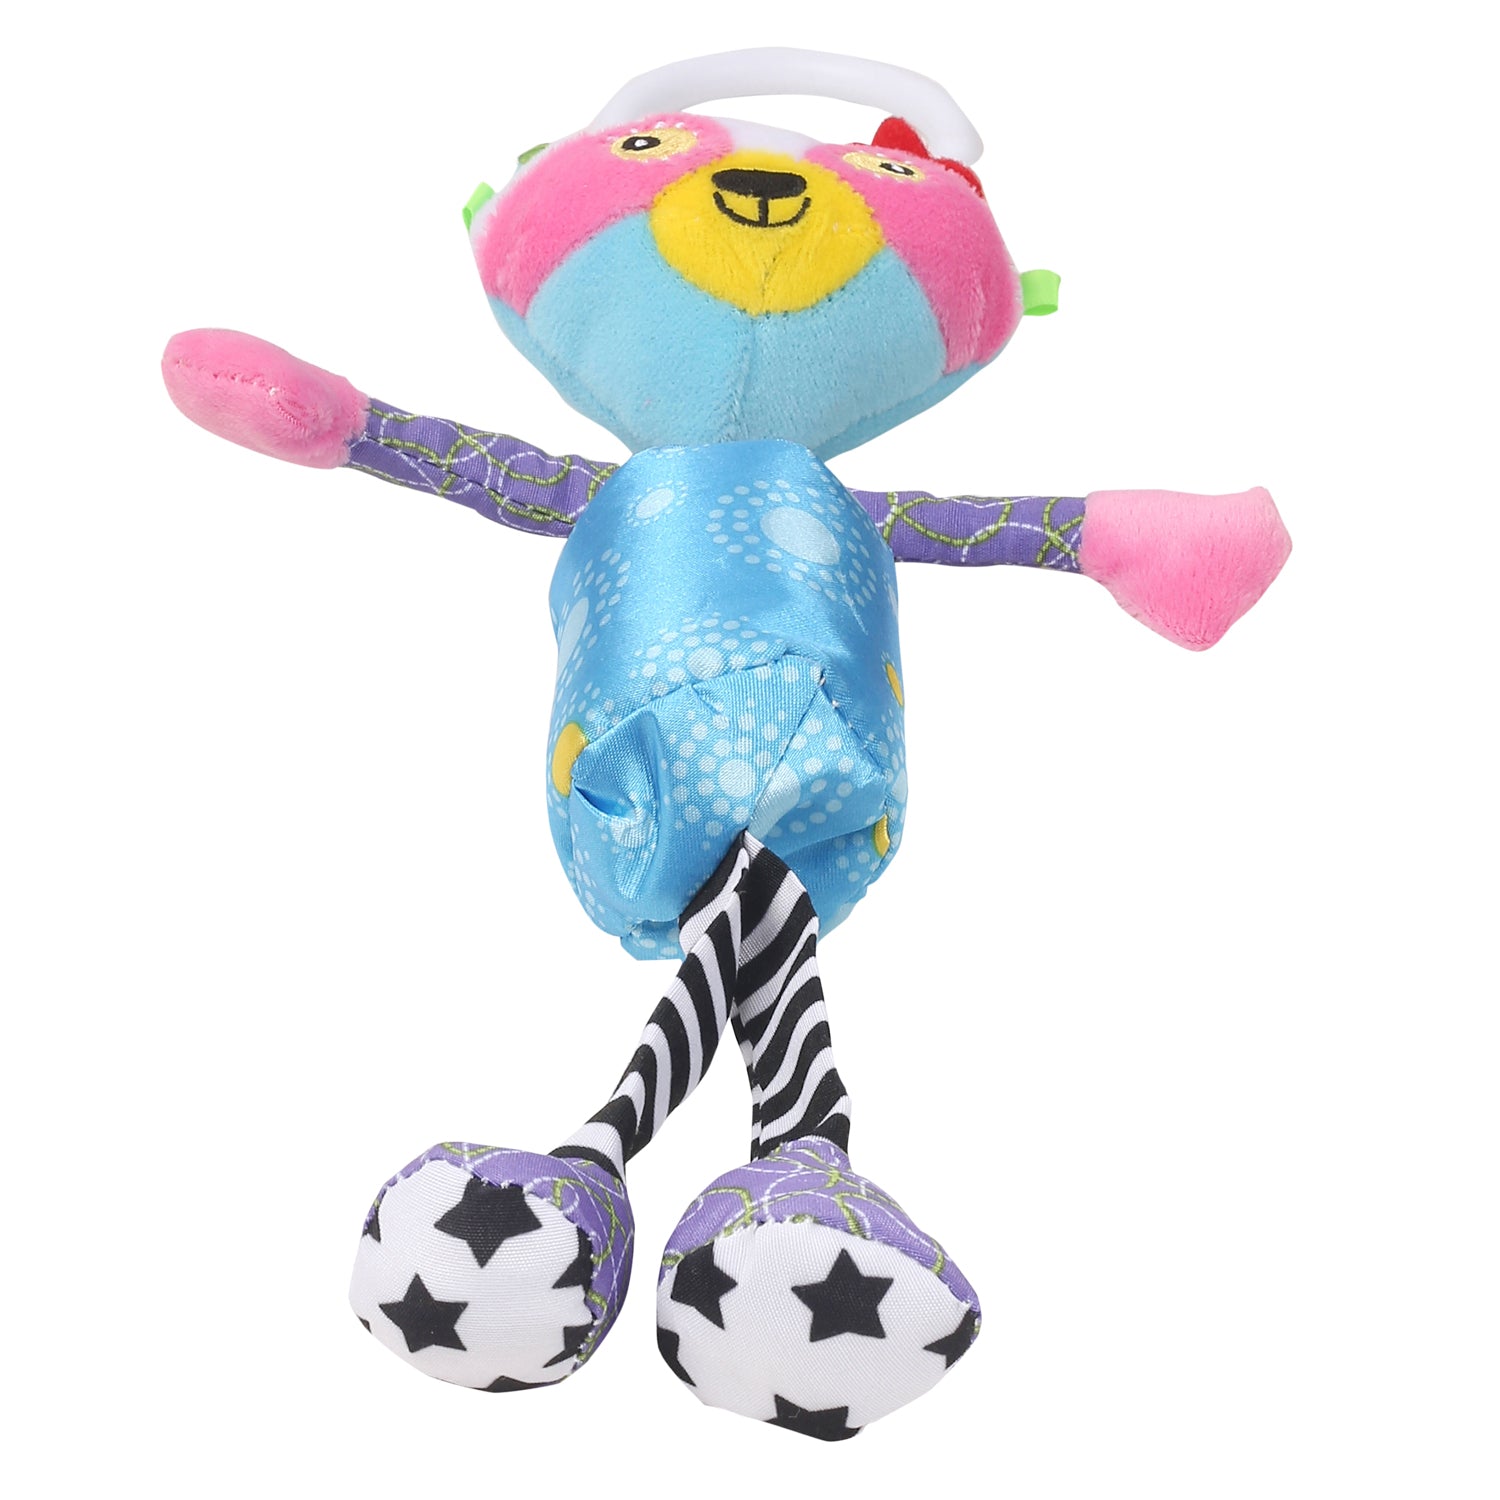 My Best Friend Pink And Blue Hanging Musical Toy / Wind Chime Soft Rattle - Baby Moo